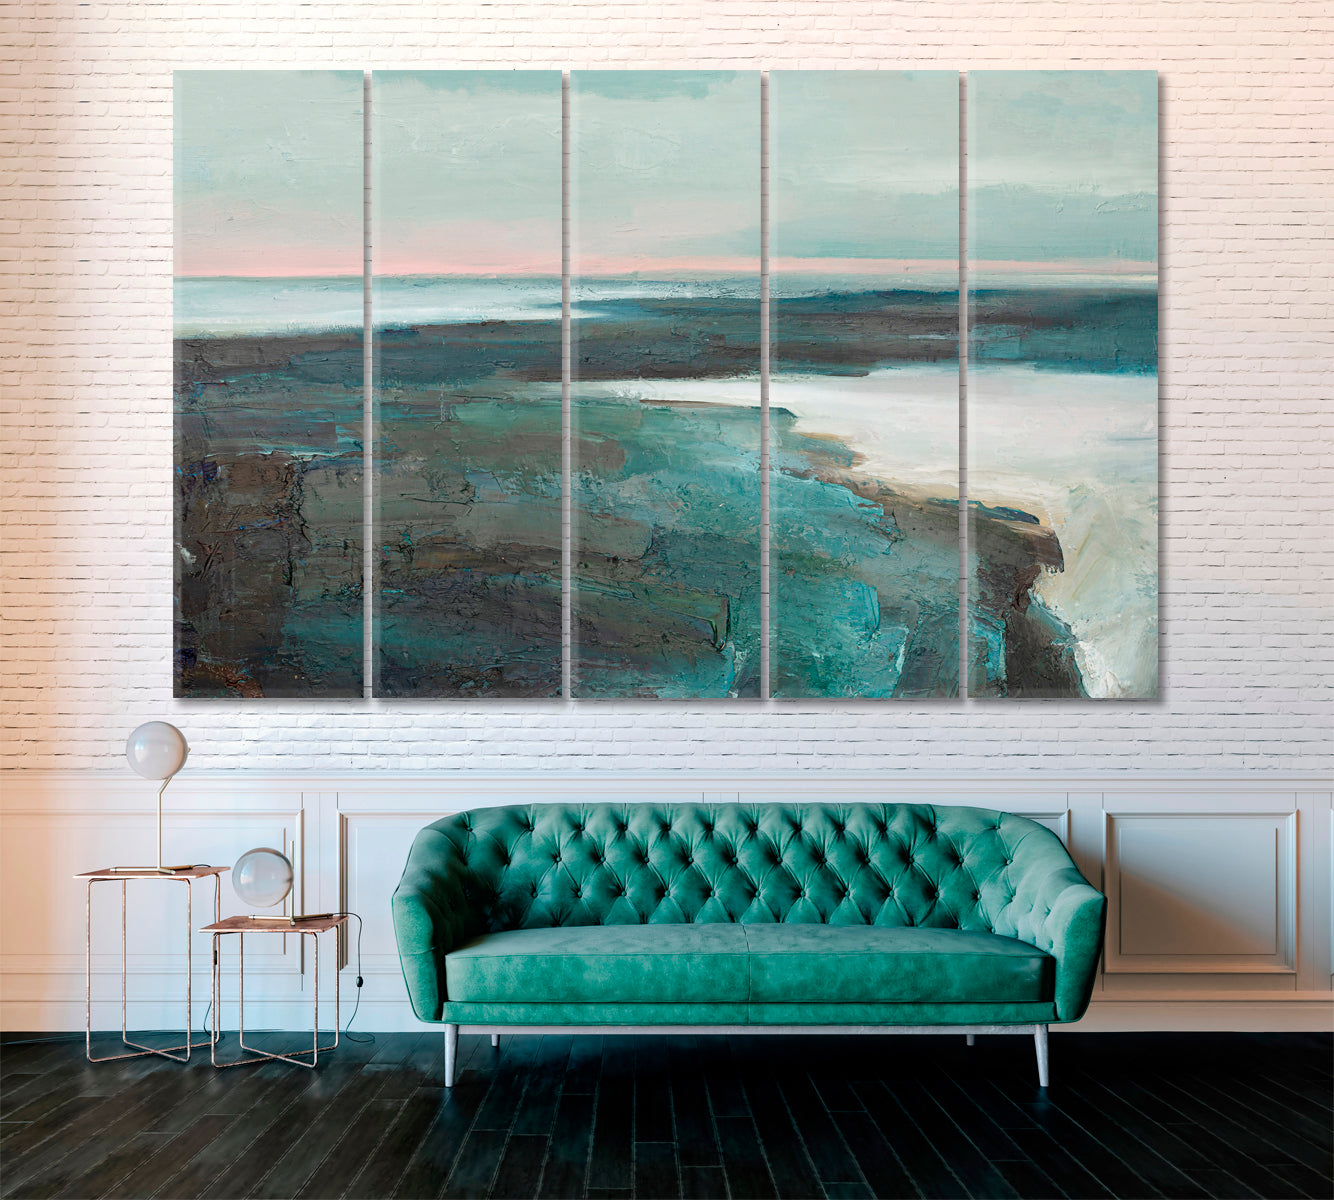 Abstract Seascape Canvas Print ArtLexy 5 Panels 36"x24" inches 